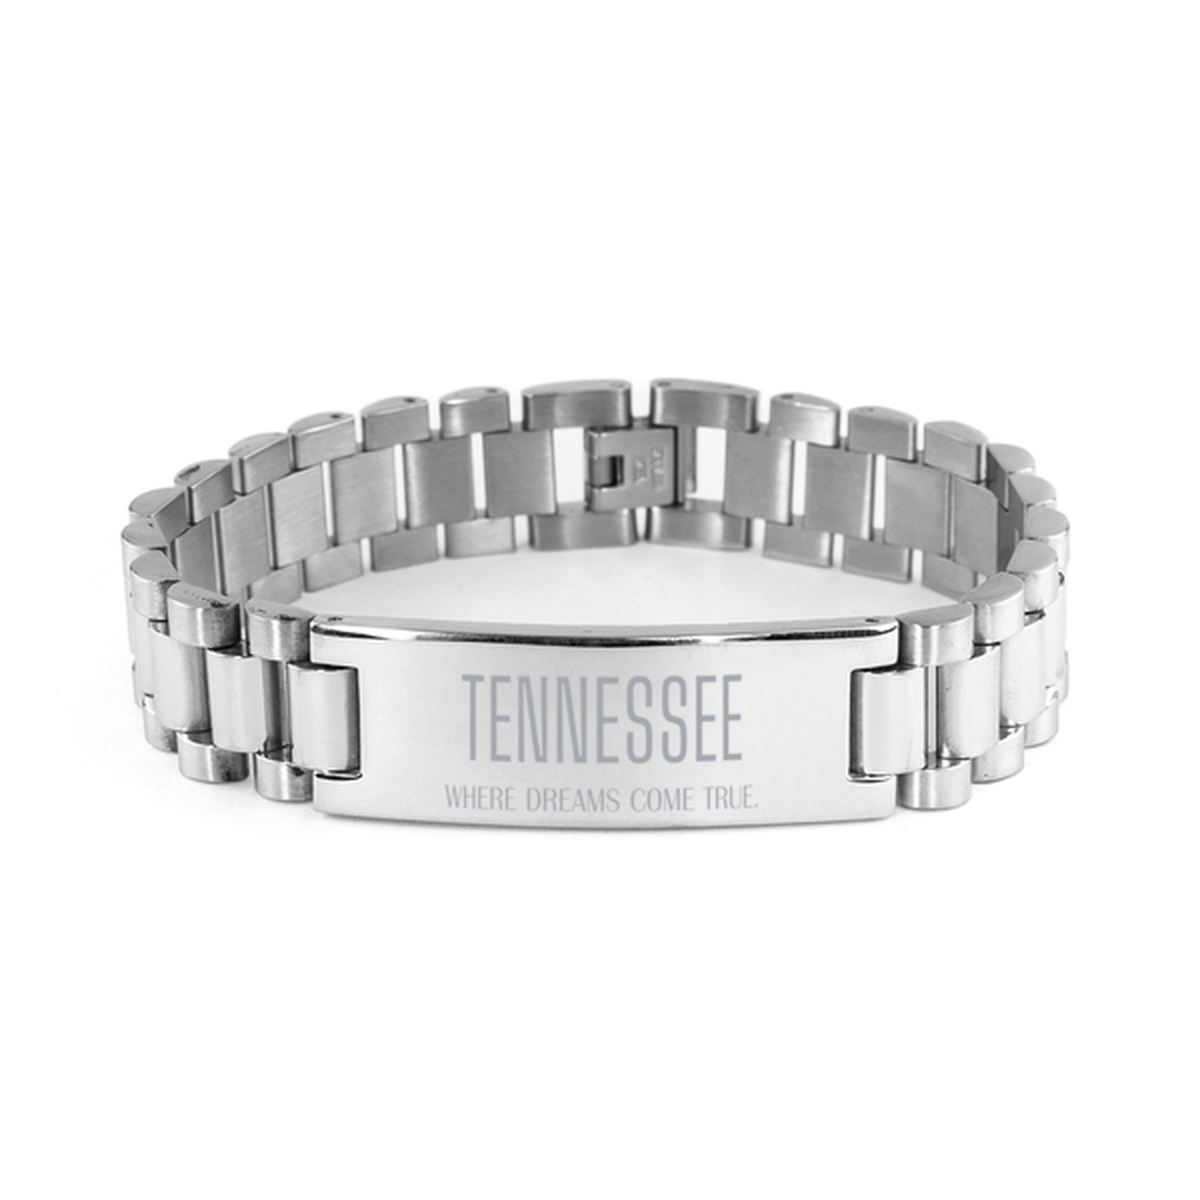 Love Tennessee State Ladder Stainless Steel Bracelet, Tennessee Where dreams come true, Birthday Inspirational Gifts For Tennessee Men, Women, Friends